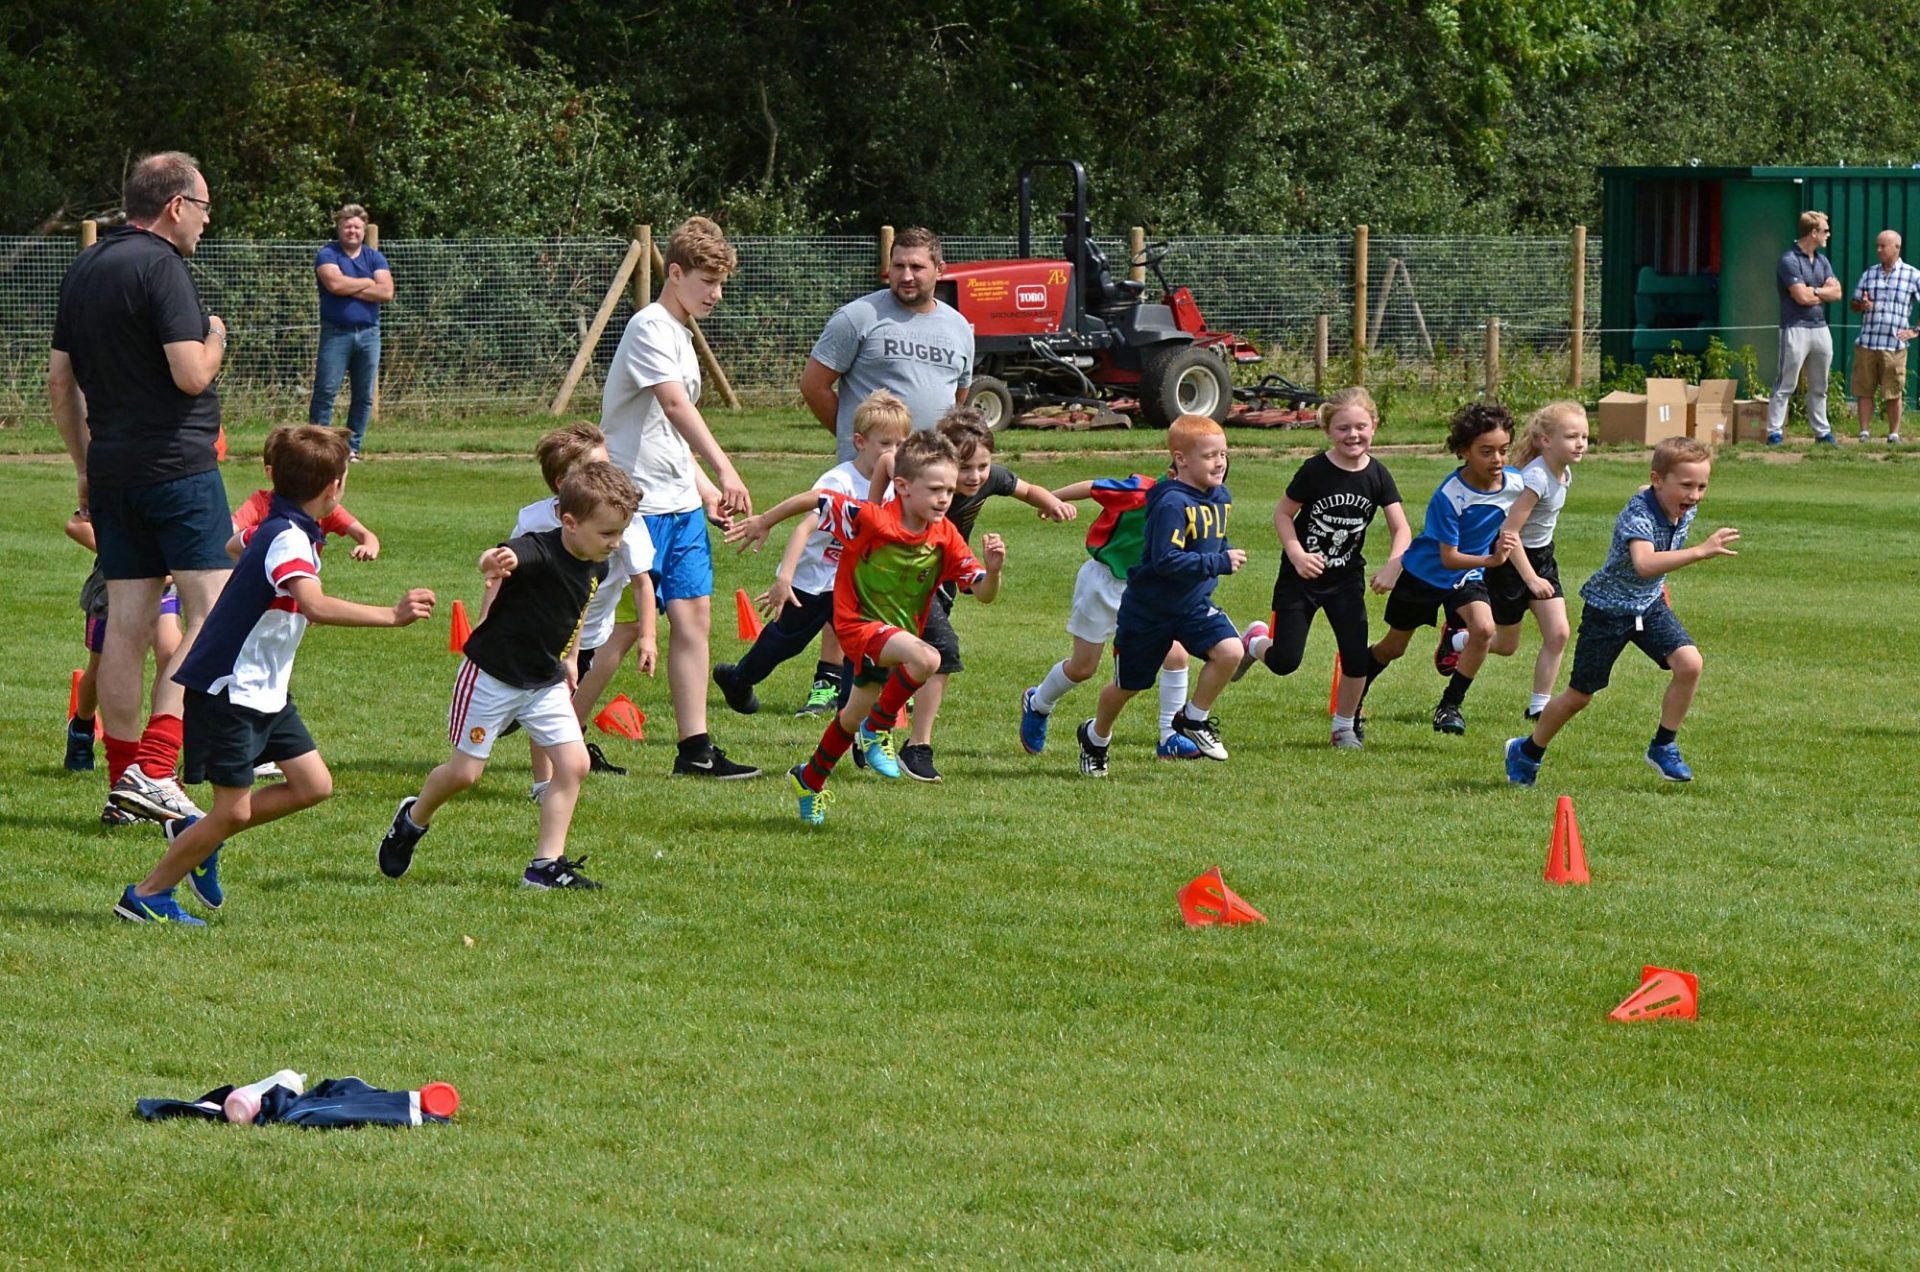 Give Mini Rugby a Try - 22 July - Harlow RUFC